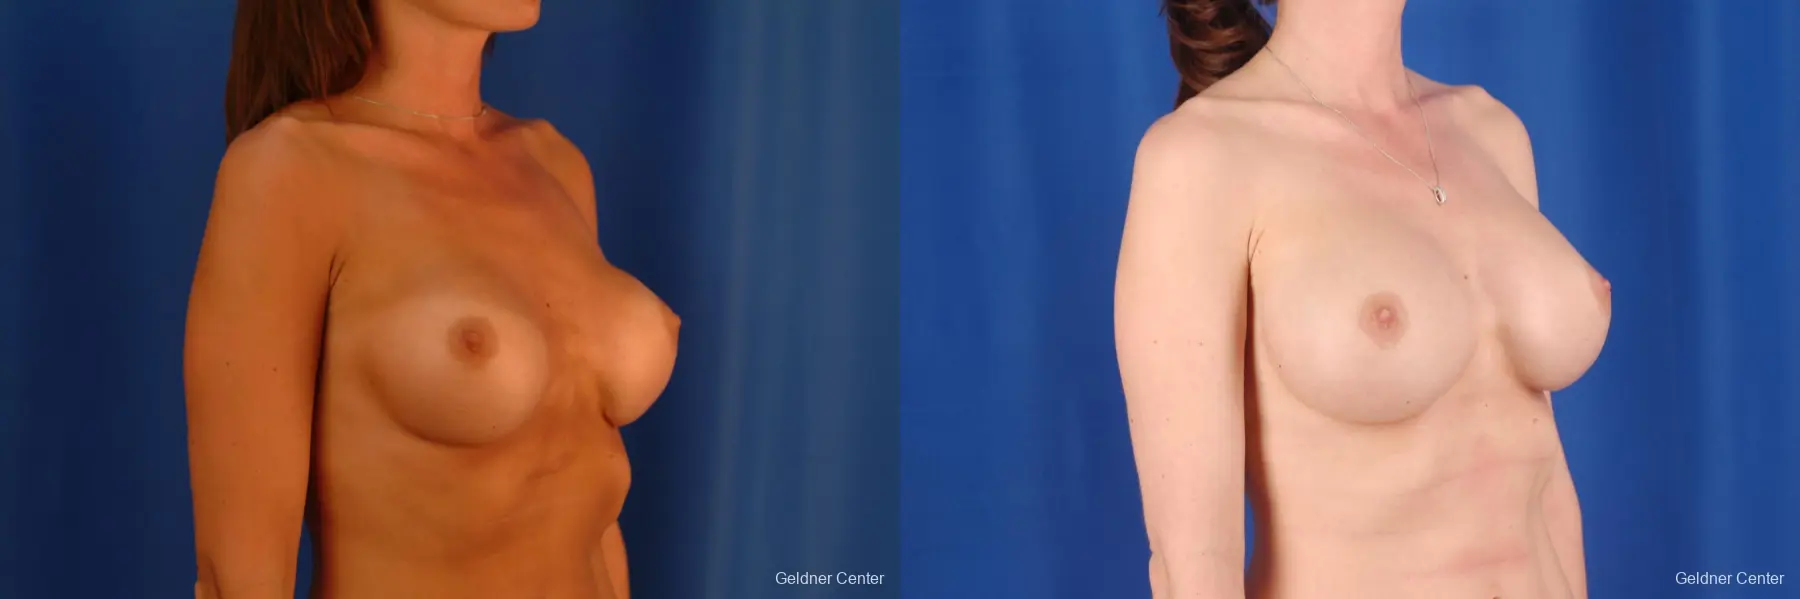 Breast Augmentation Lake Shore Dr, Chicago 2619 - Before and After 3